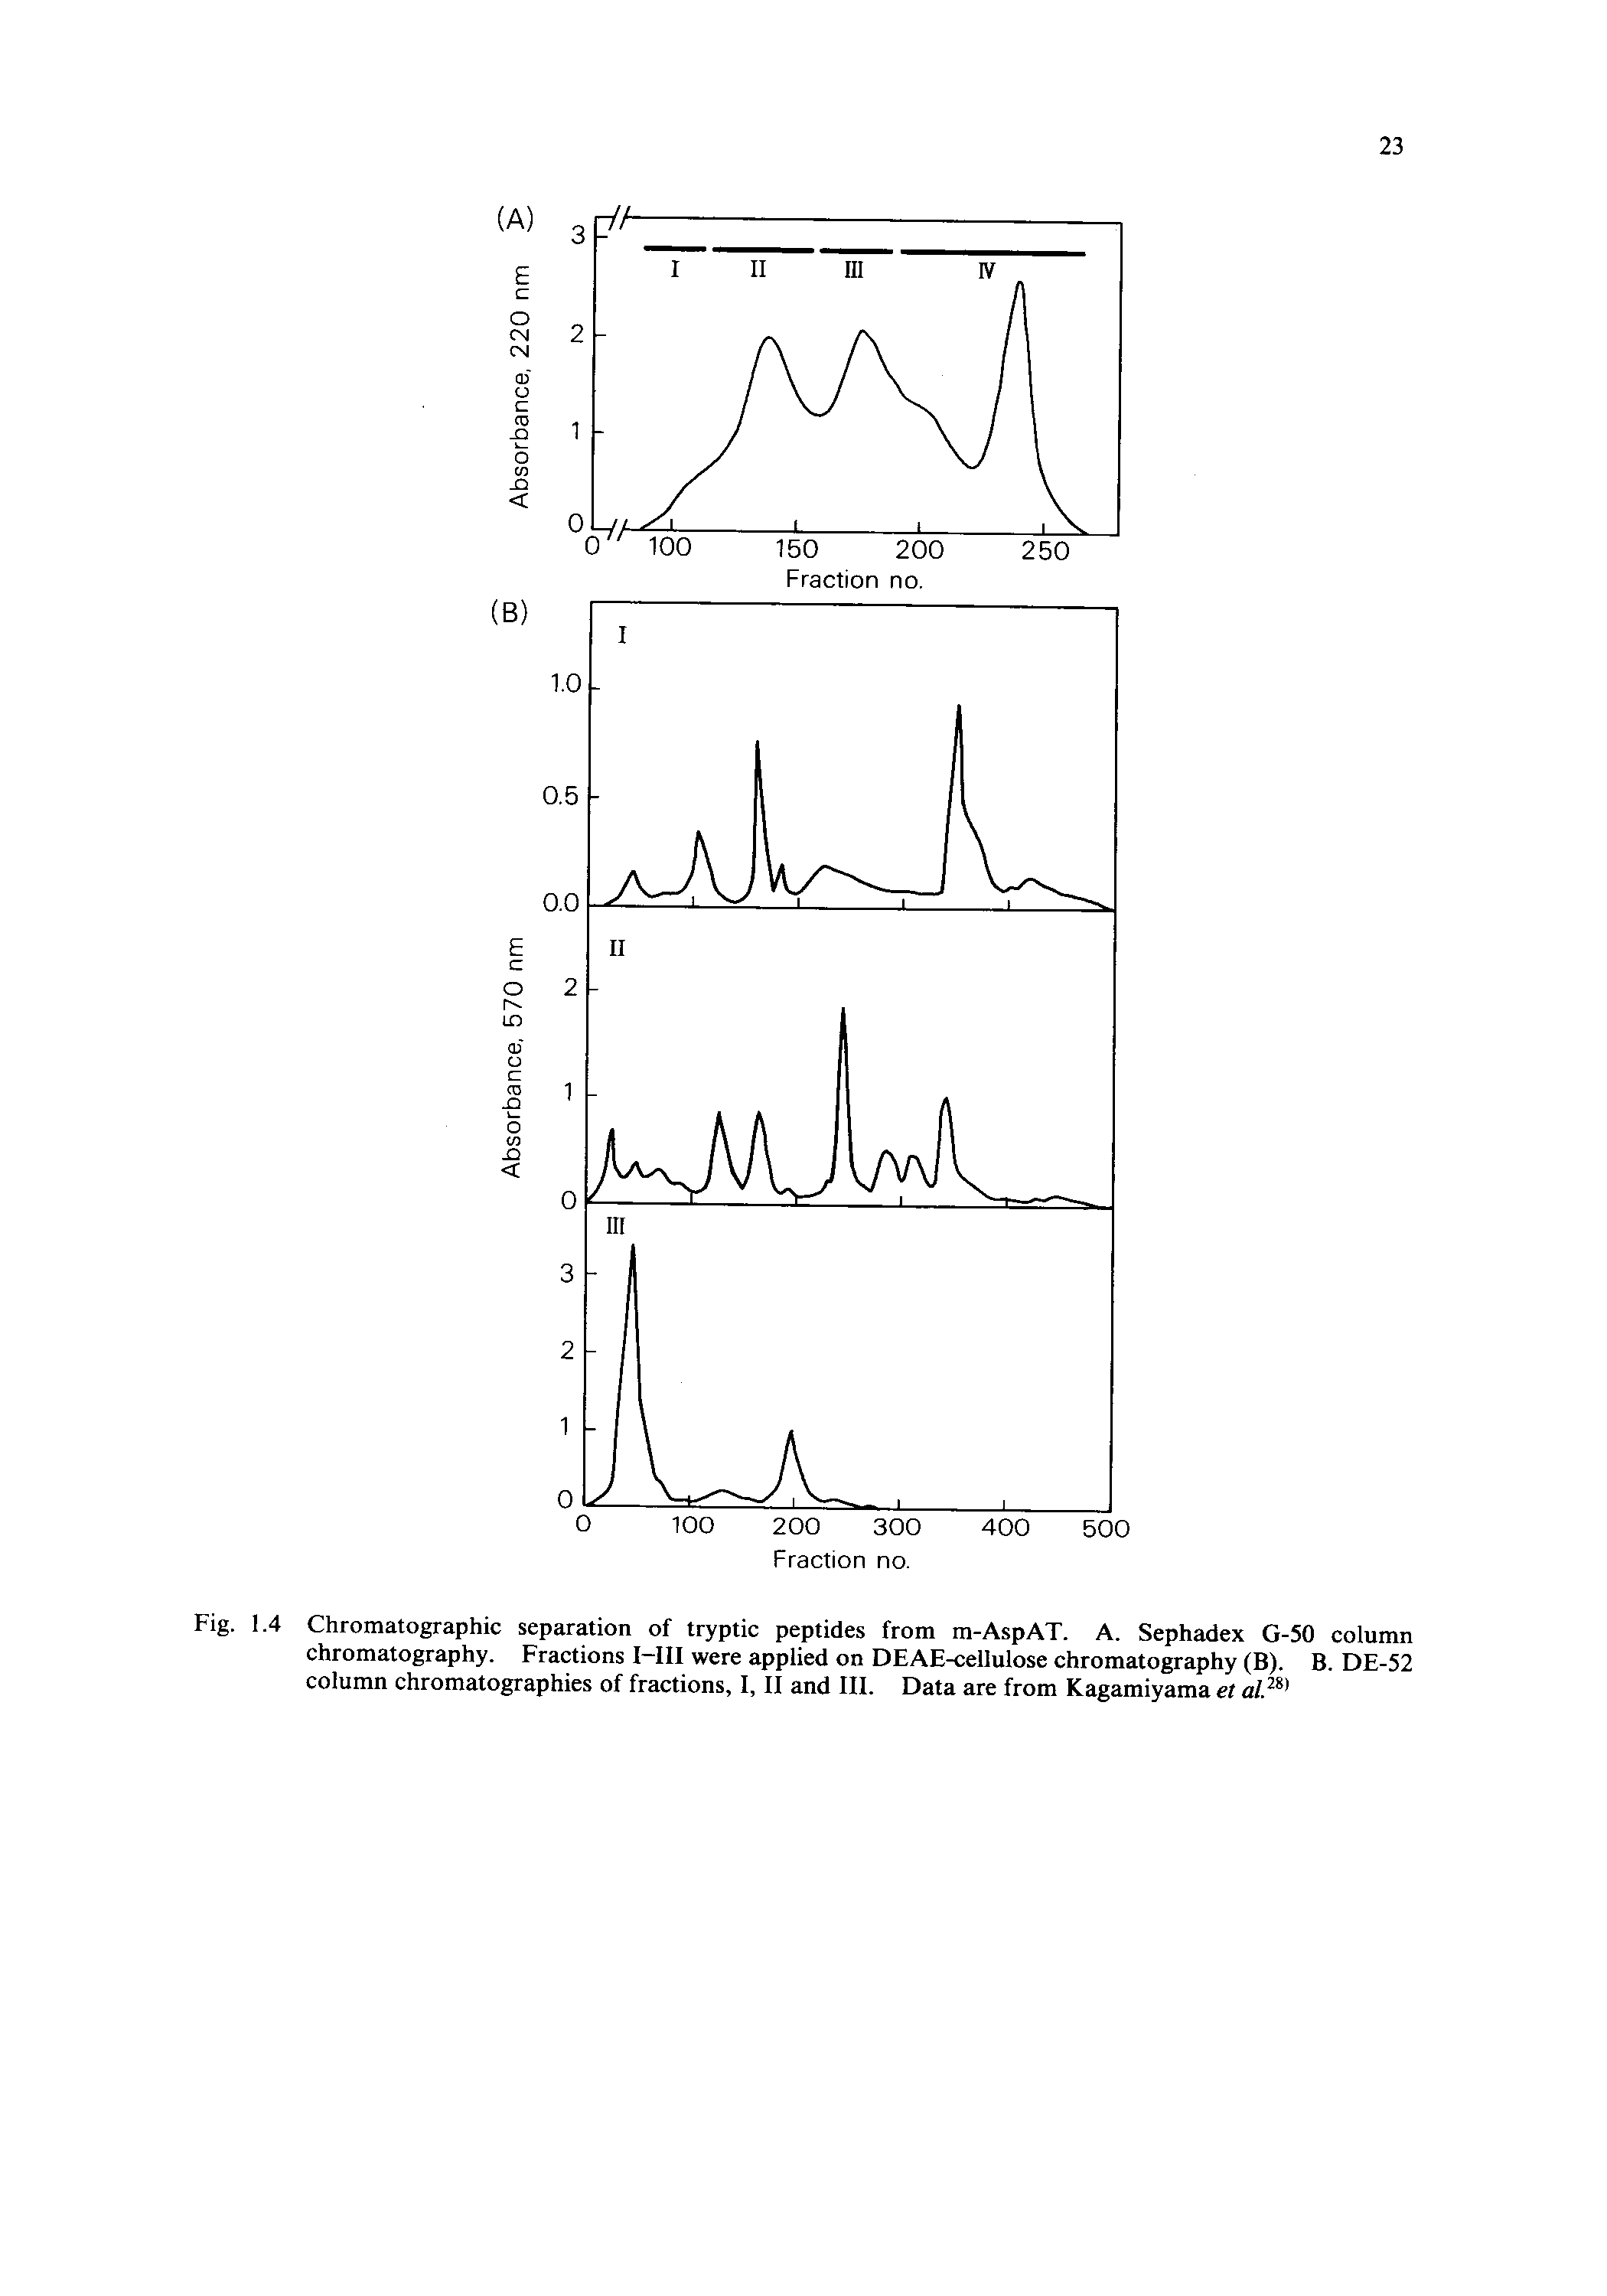 Fig. 1.4 Chromatographic separation of tryptic peptides from m-AspAT. A. Sephadex G-50 column chromatography. Fractions I—111 were applied on DEAE-cellulose chromatography (B). B. DE-52 column chromatographies of fractions, I, II and III. Data are from Kagamiyama et al.2S)...